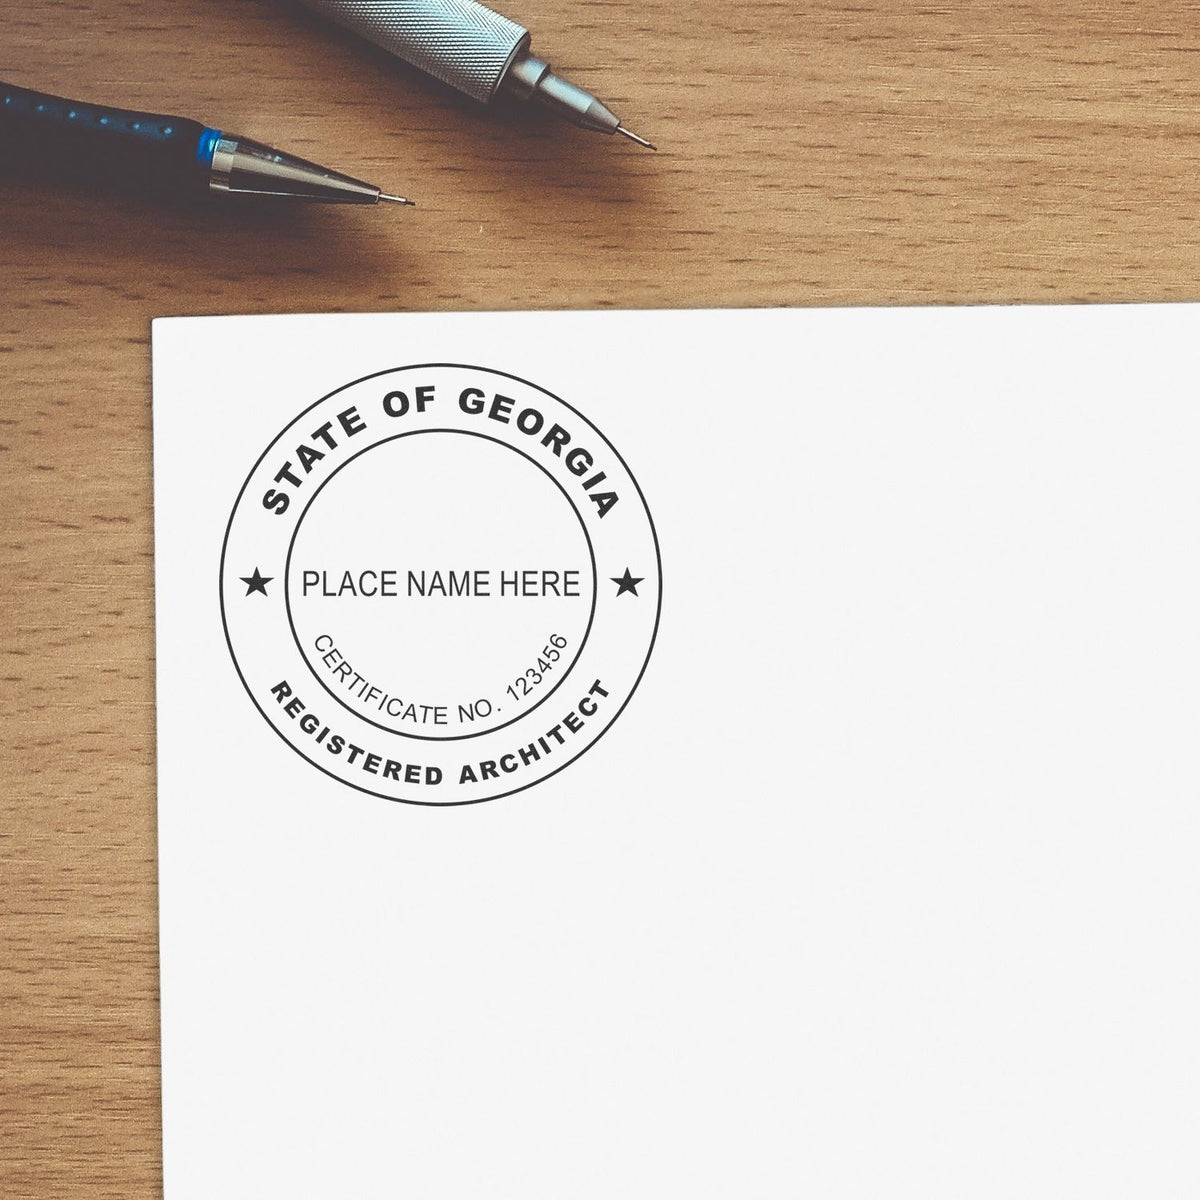 The Slim Pre-Inked Georgia Architect Seal Stamp stamp impression comes to life with a crisp, detailed photo on paper - showcasing true professional quality.